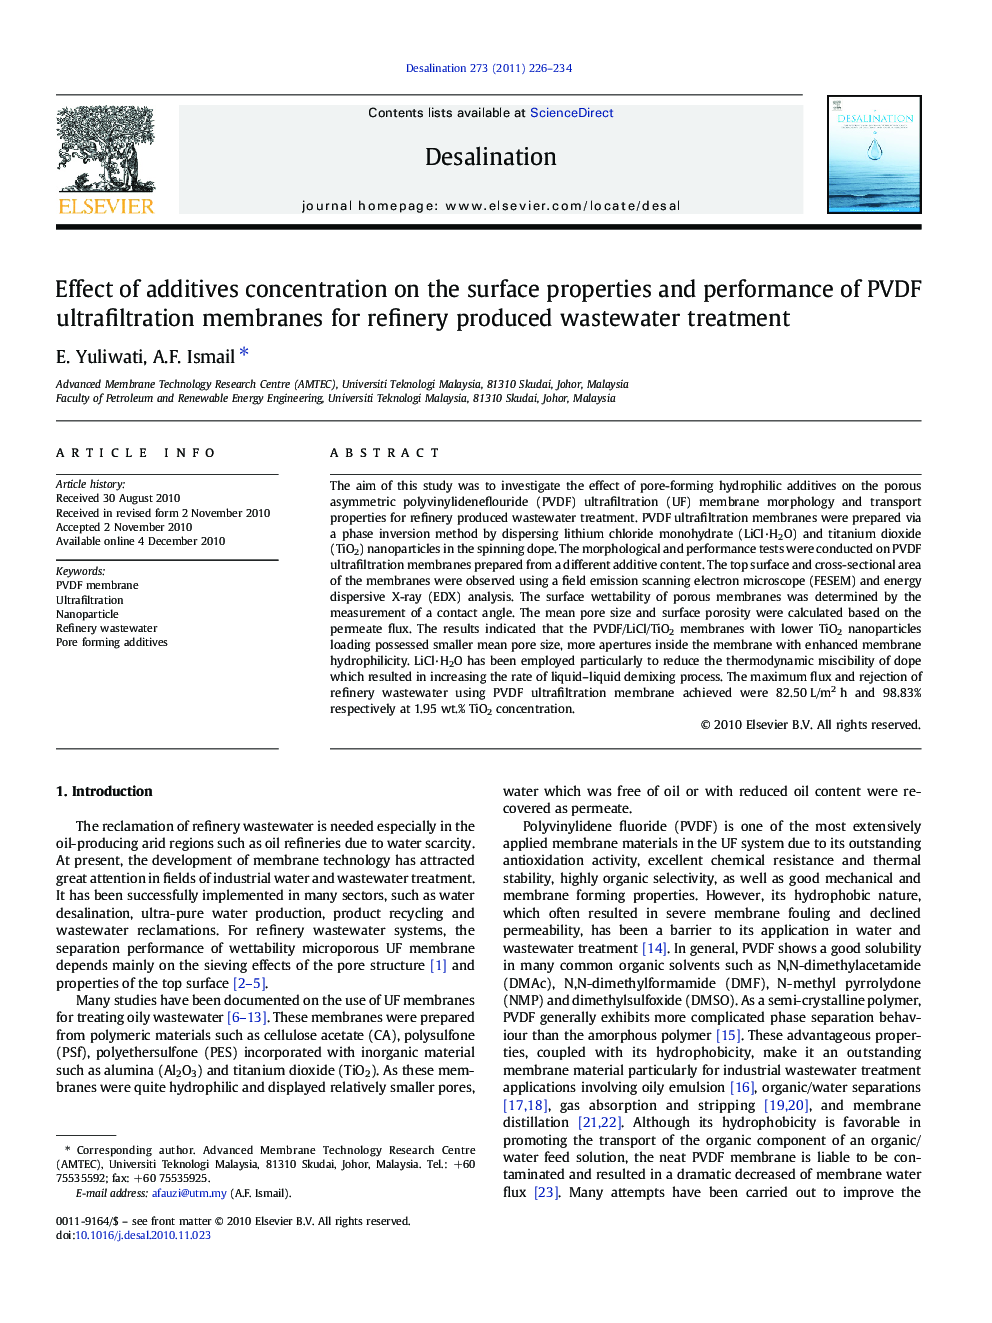 Effect of additives concentration on the surface properties and performance of PVDF ultrafiltration membranes for refinery produced wastewater treatment